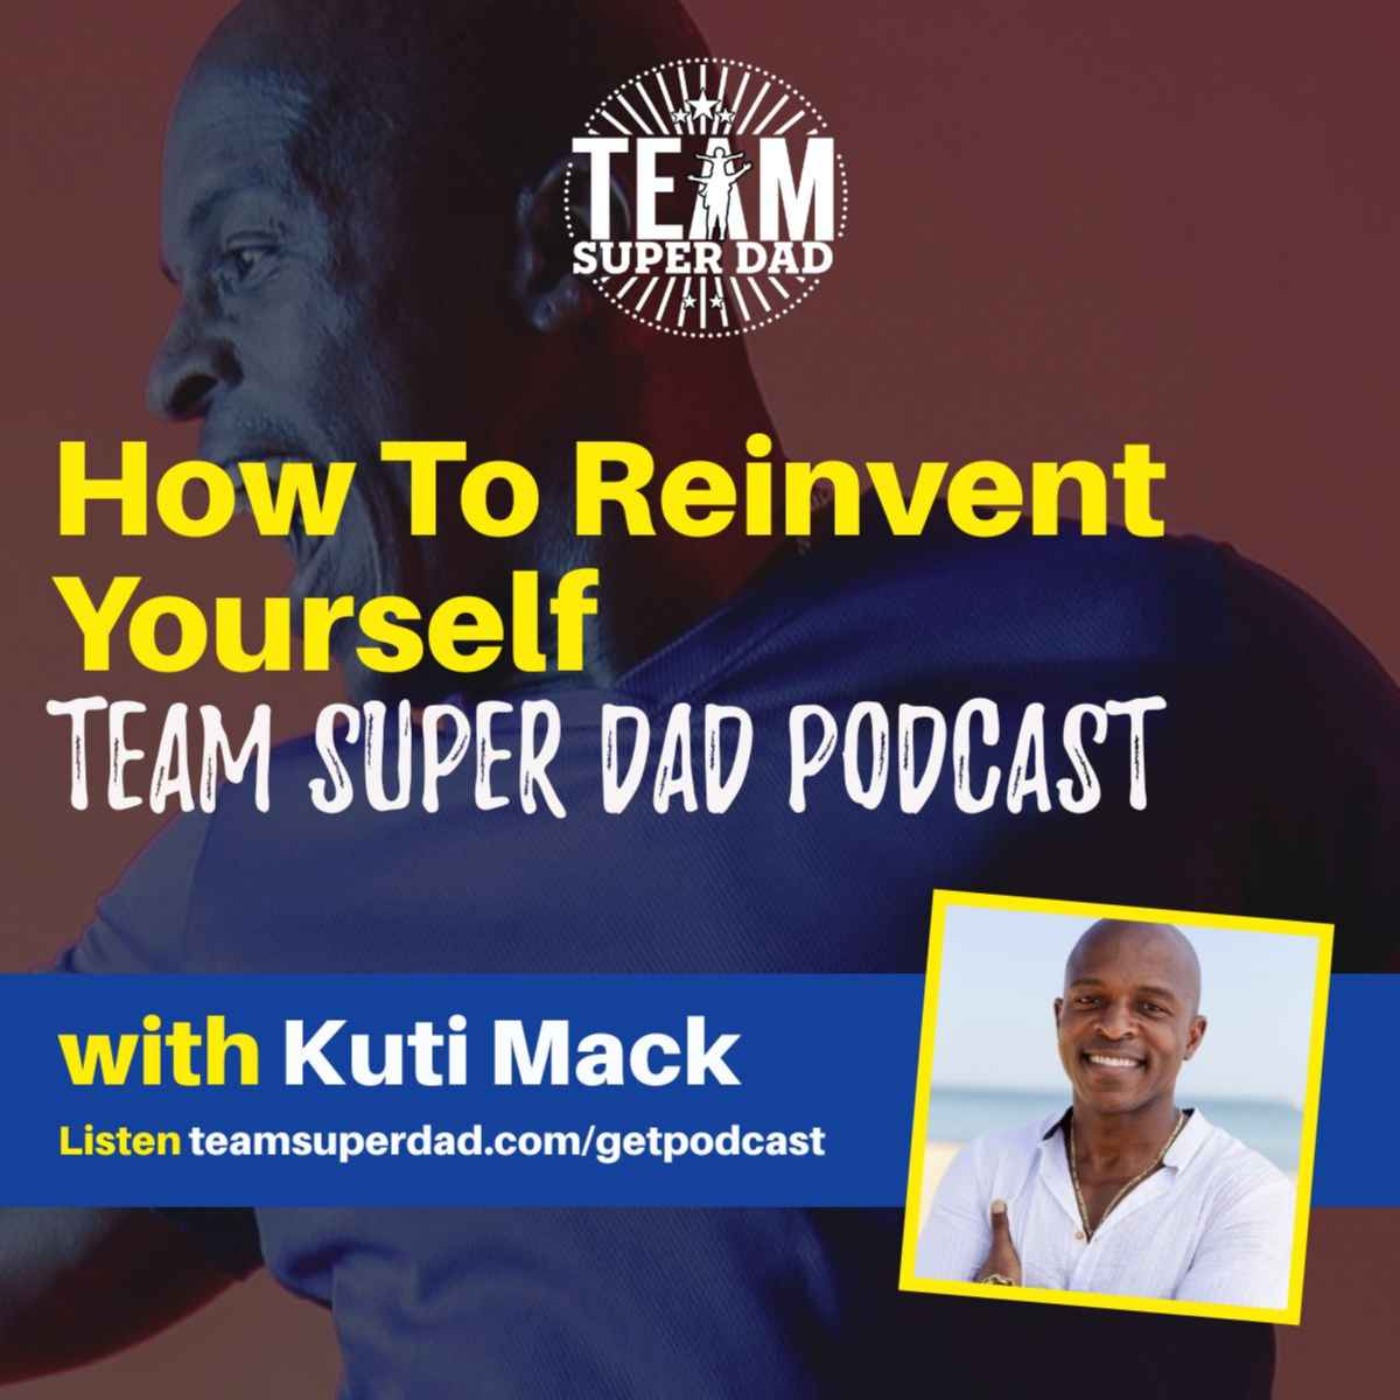 How To Reinvent Yourself with Kuti Mack